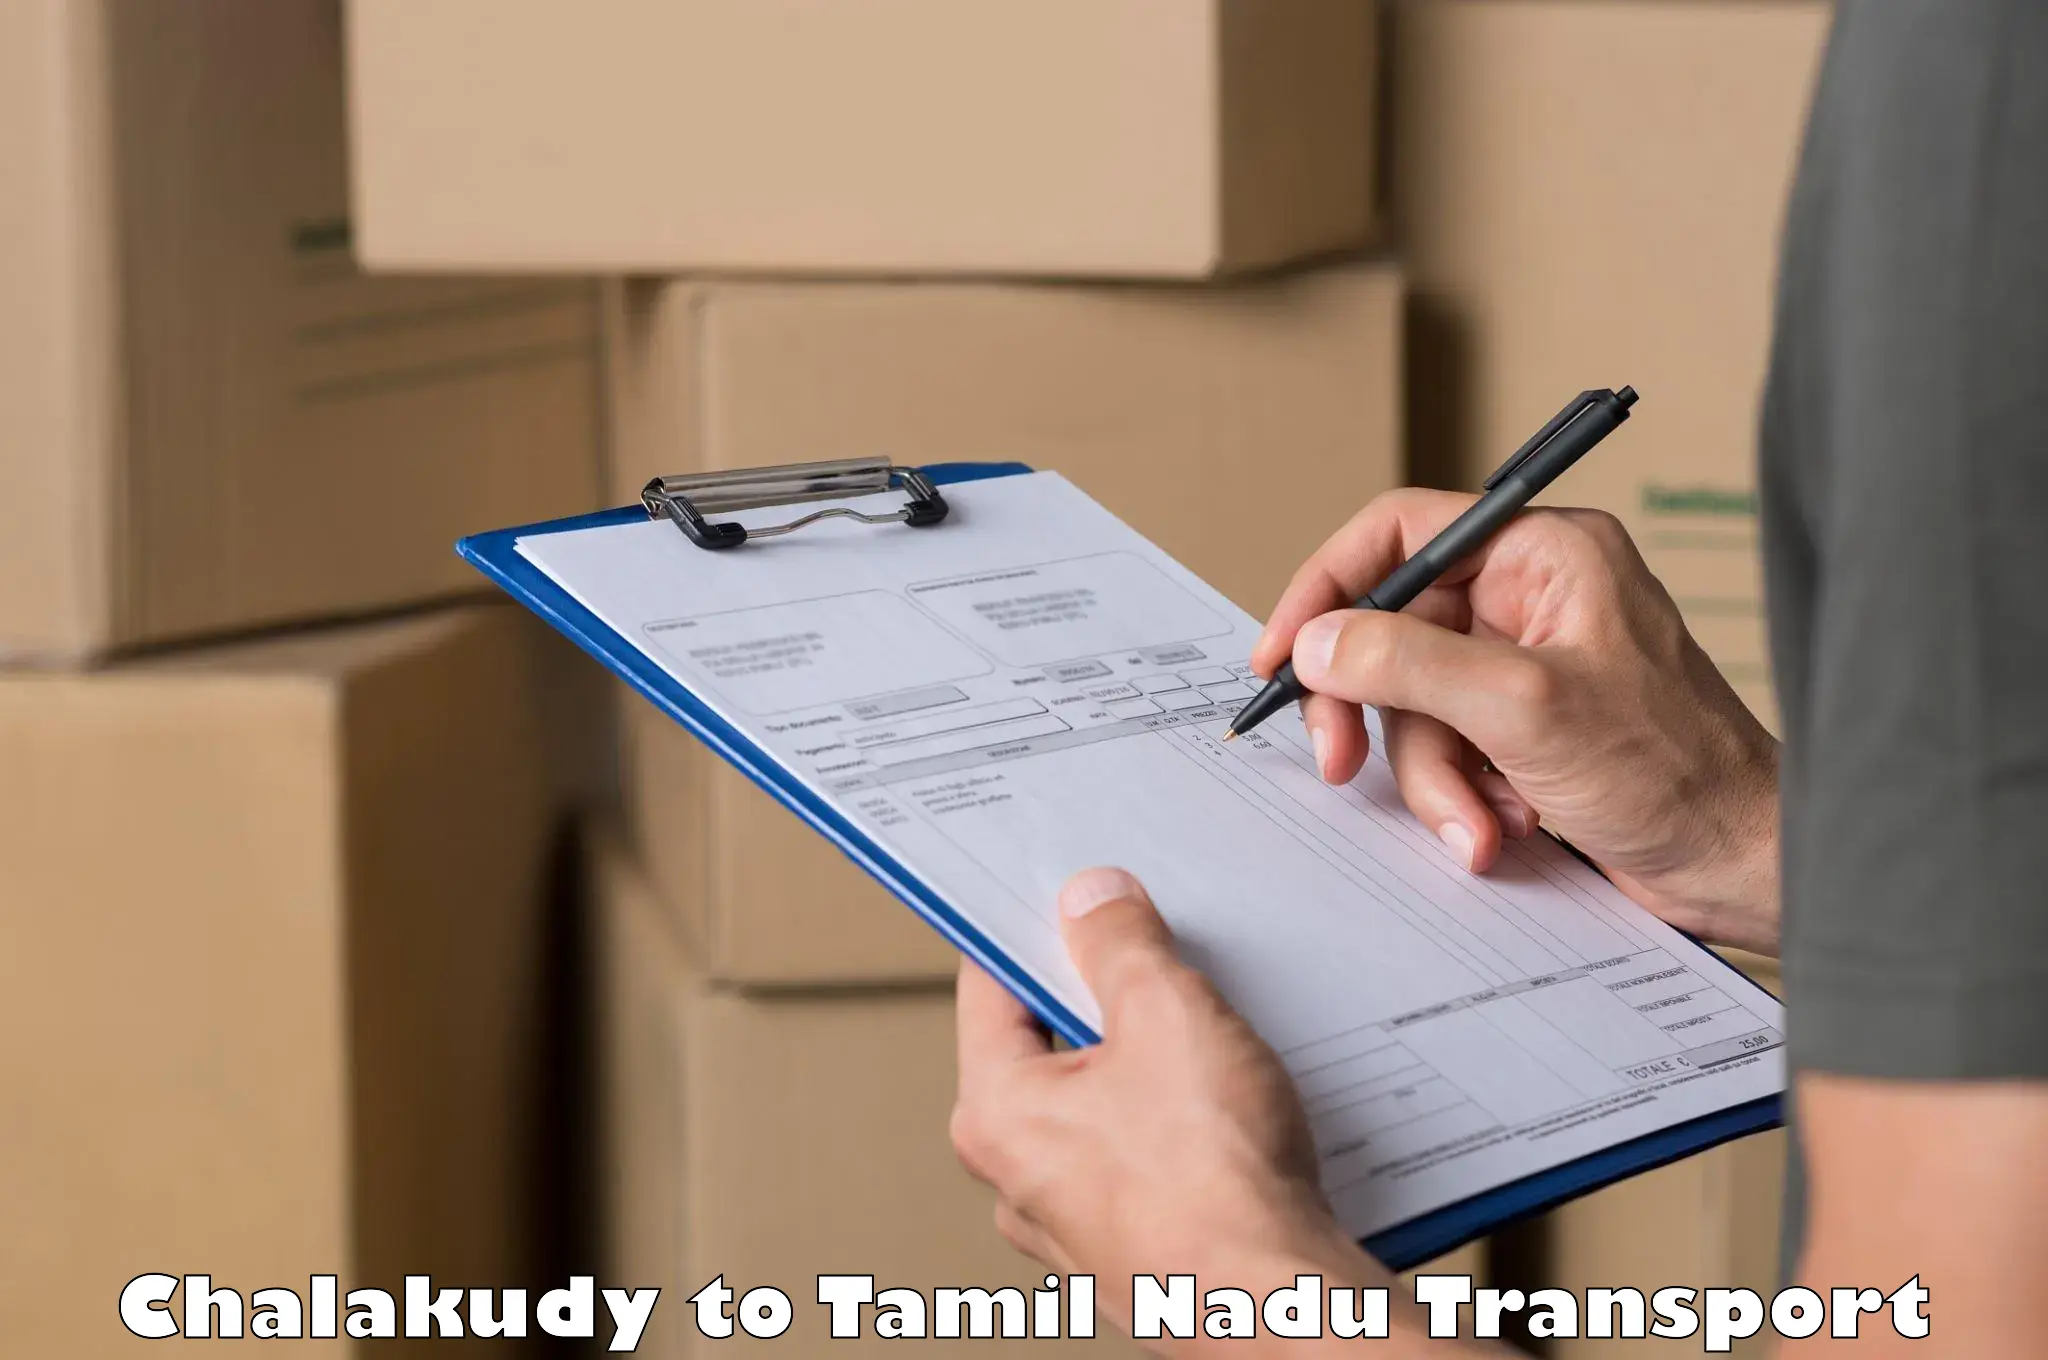 Goods delivery service Chalakudy to Srivaikuntam